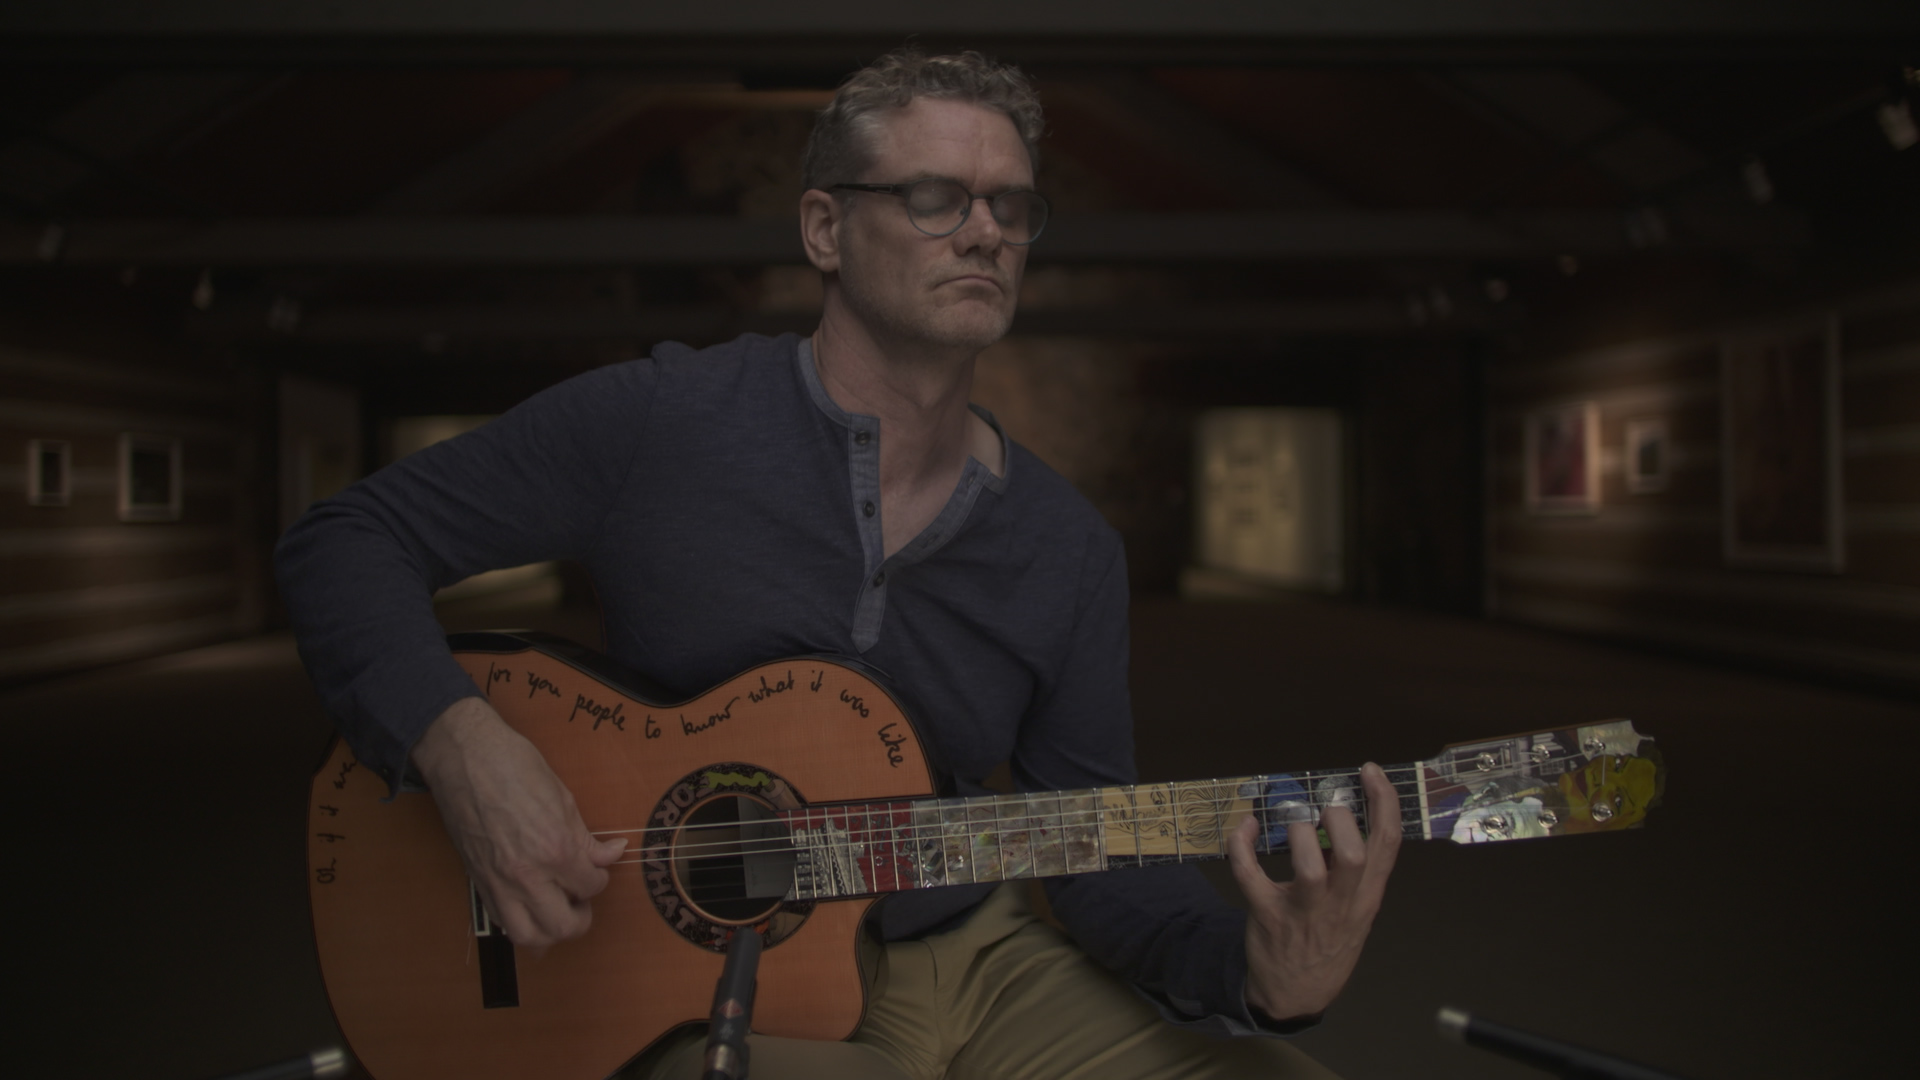 Jesse playing a guitar made by Sergi de Jonge, inspired by the works of J.E.H. MacDonald, 2016, Courtesy of Riddle Films, McMichael Canadian Art Collection